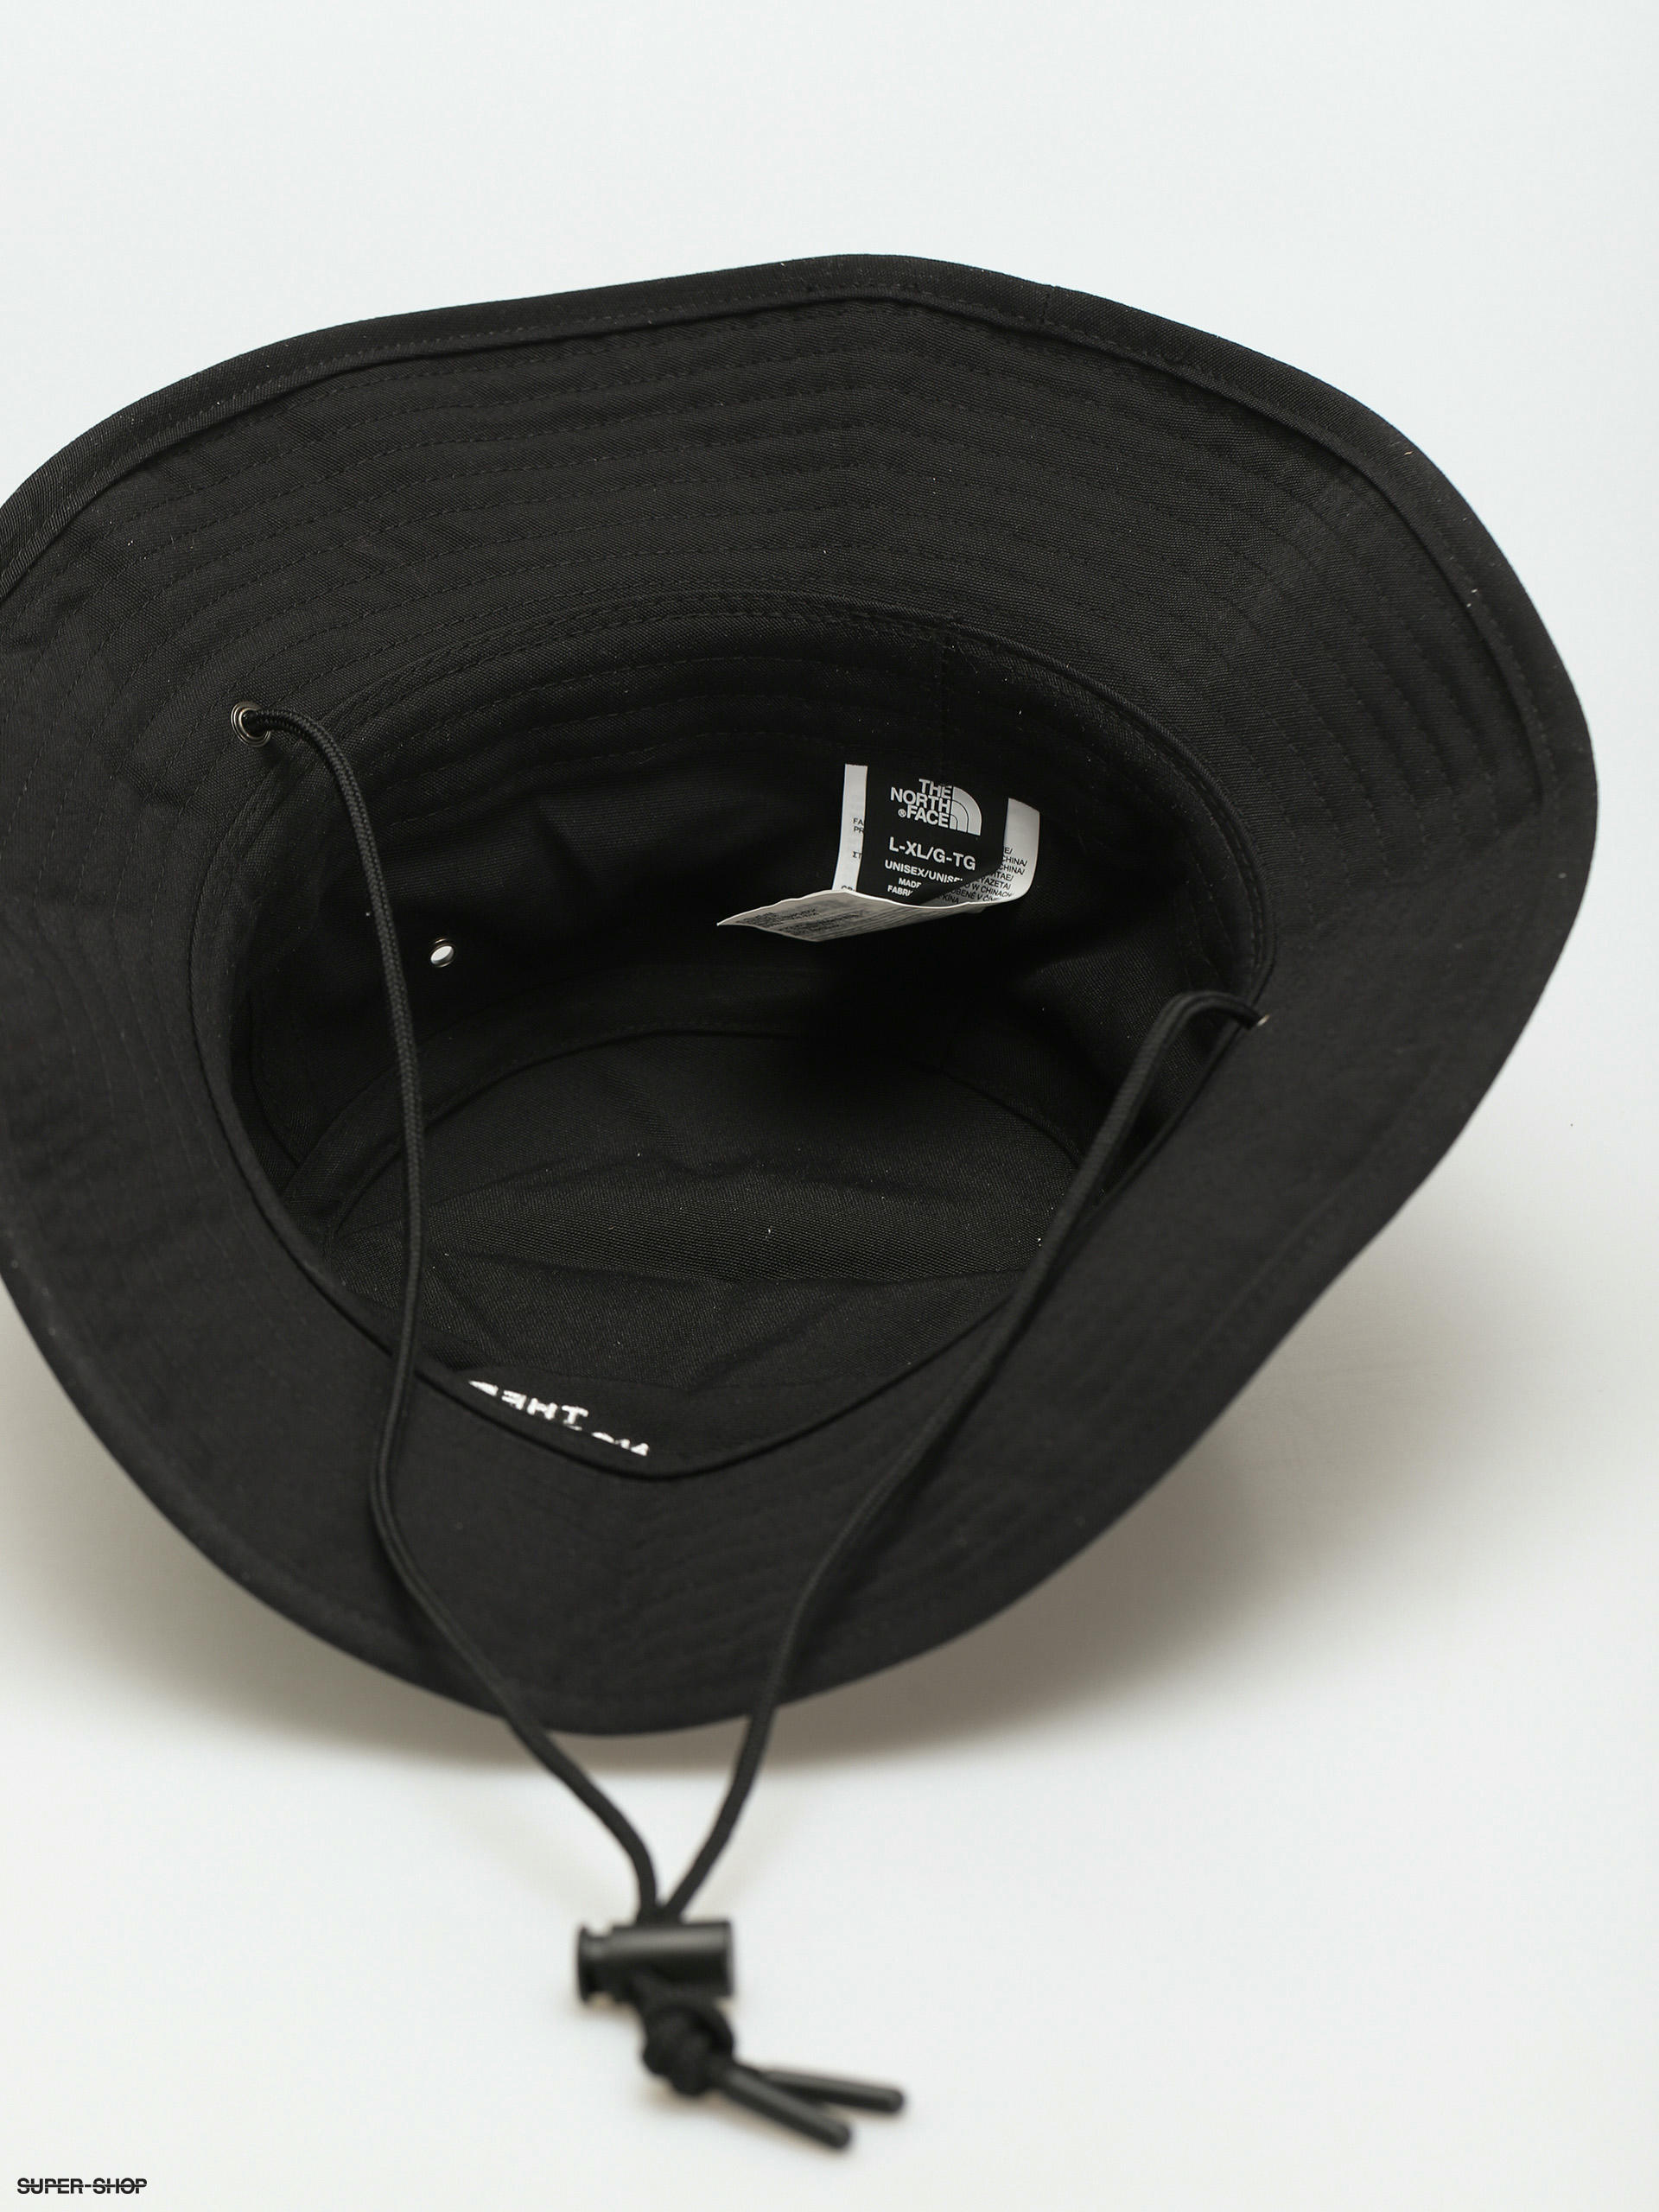 RECYCLED 66 BRIMMER HAT - BLACK – WEAR